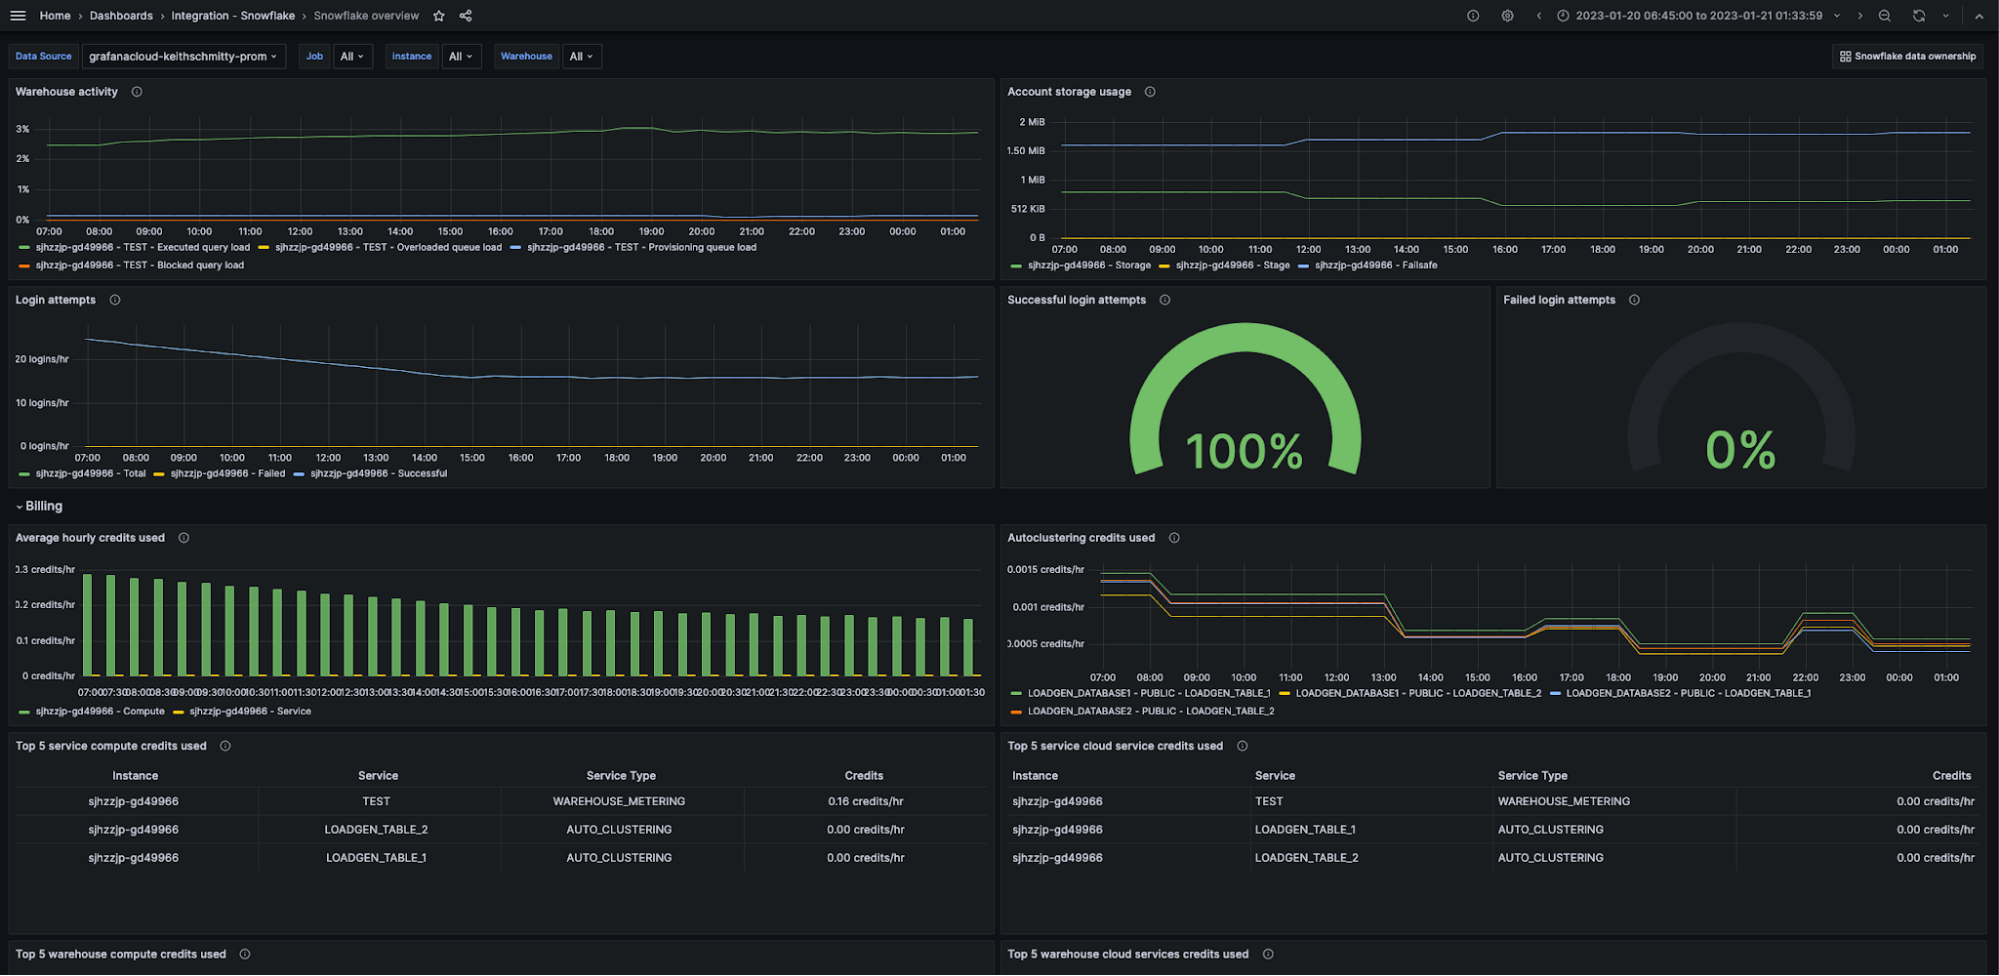 A Grafana dashboard displays an overview of a Snowflake environment.